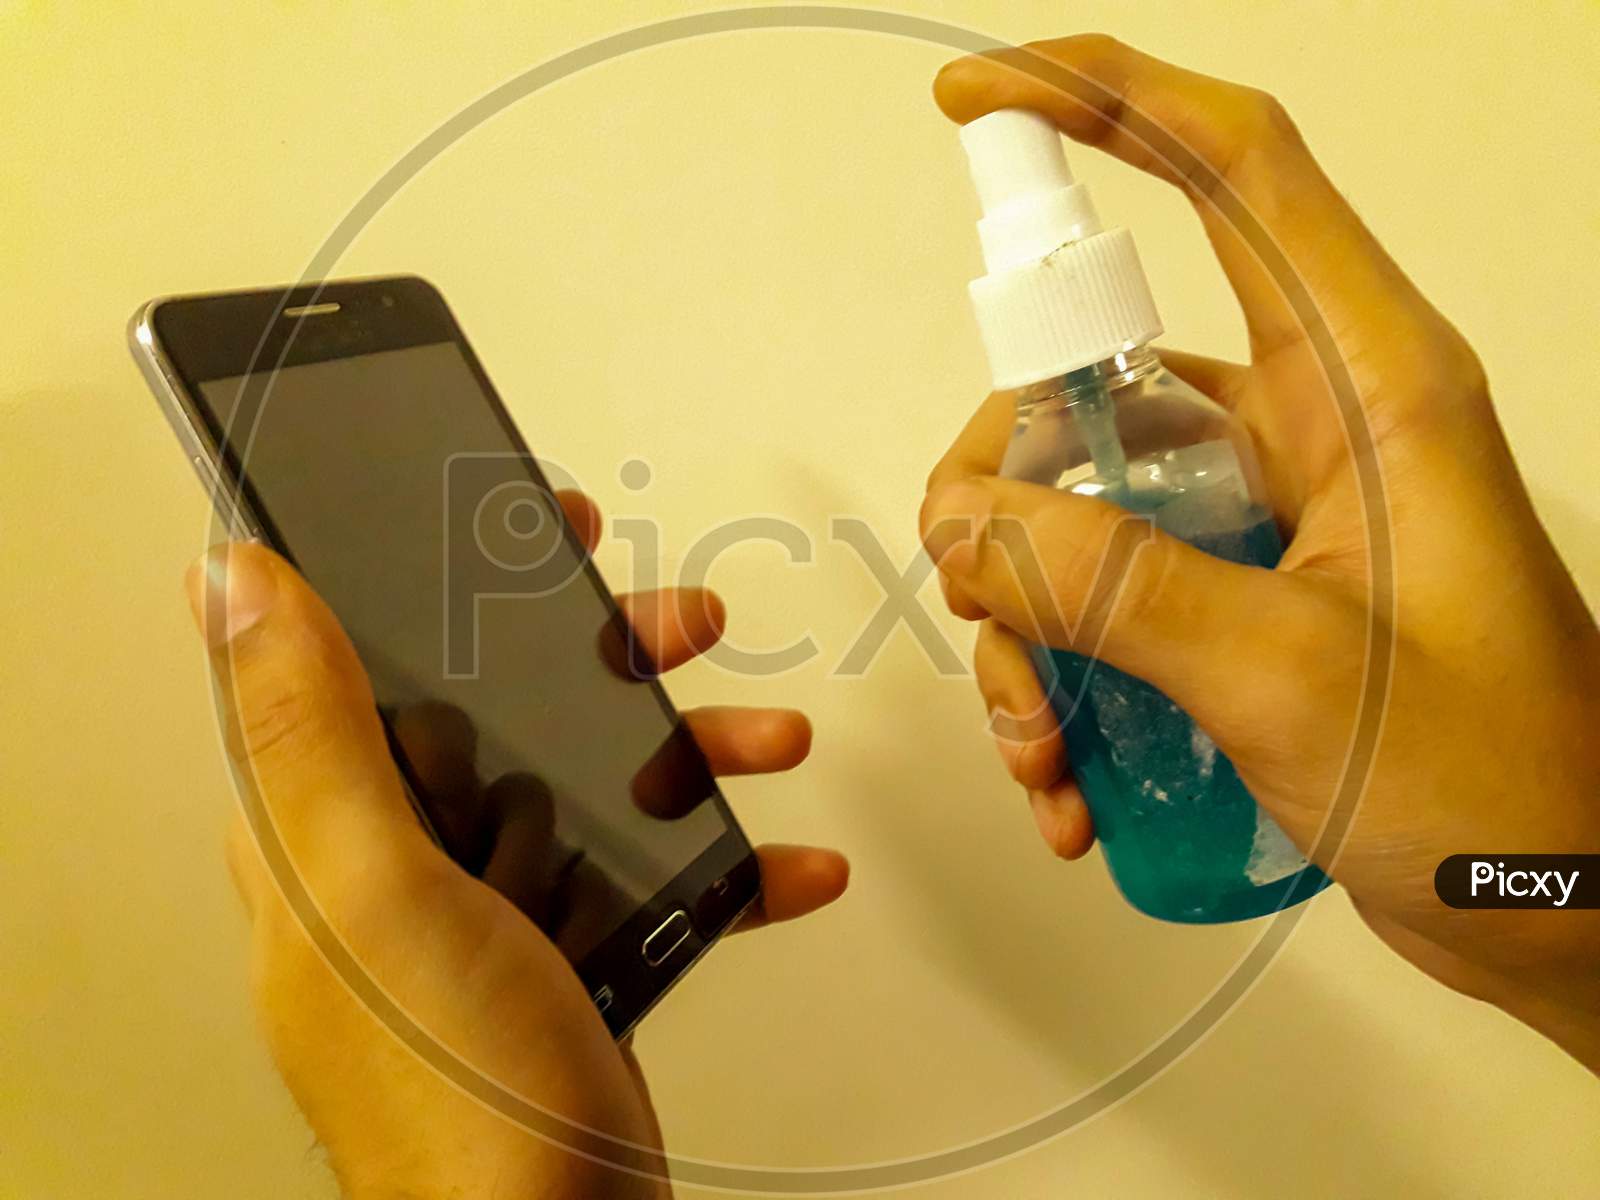 Disinfecting The Cellphone With Sanitizer With Orange Background